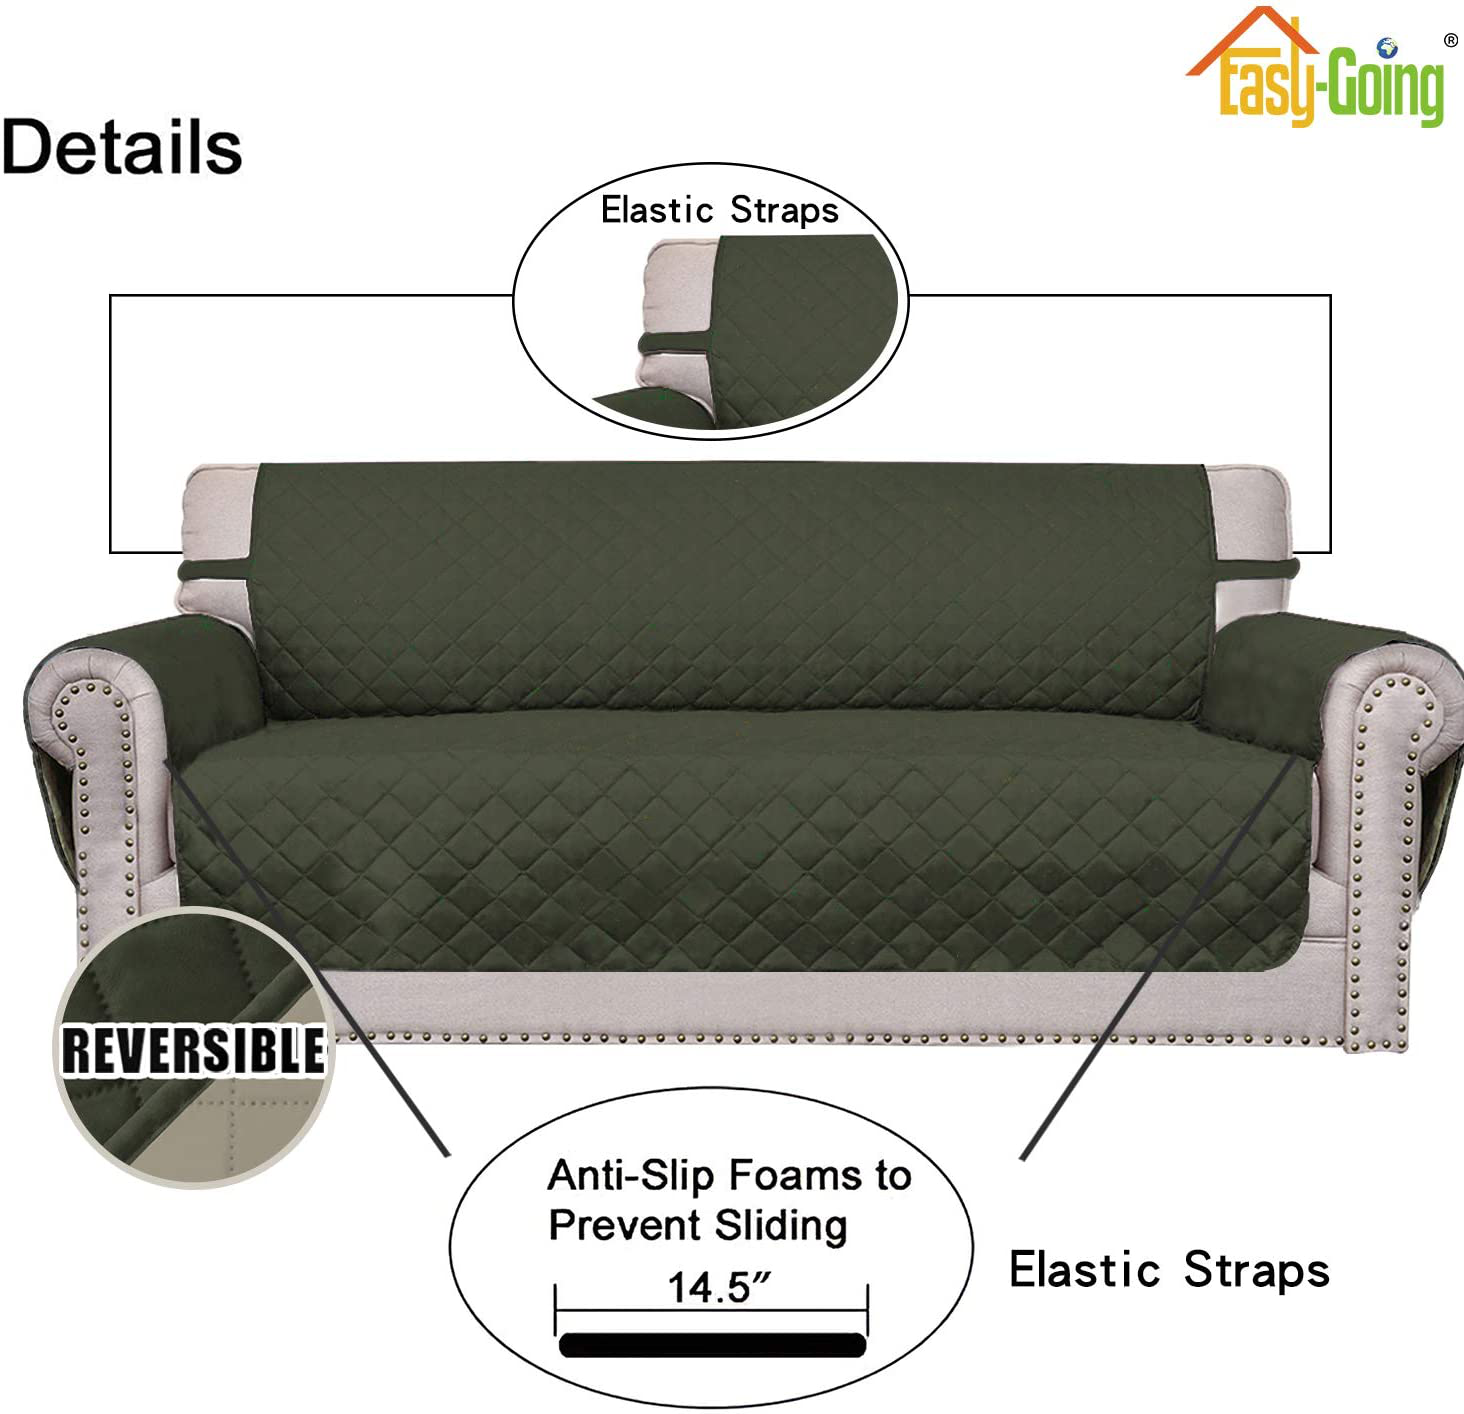 Easy-Going Sofa Slipcover Reversible Sofa Cover Water Resistant Couch Cover Furniture Protector with Elastic Straps for Pets Kids Children Dog Cat(Sofa, PeacockBlue/Beige)